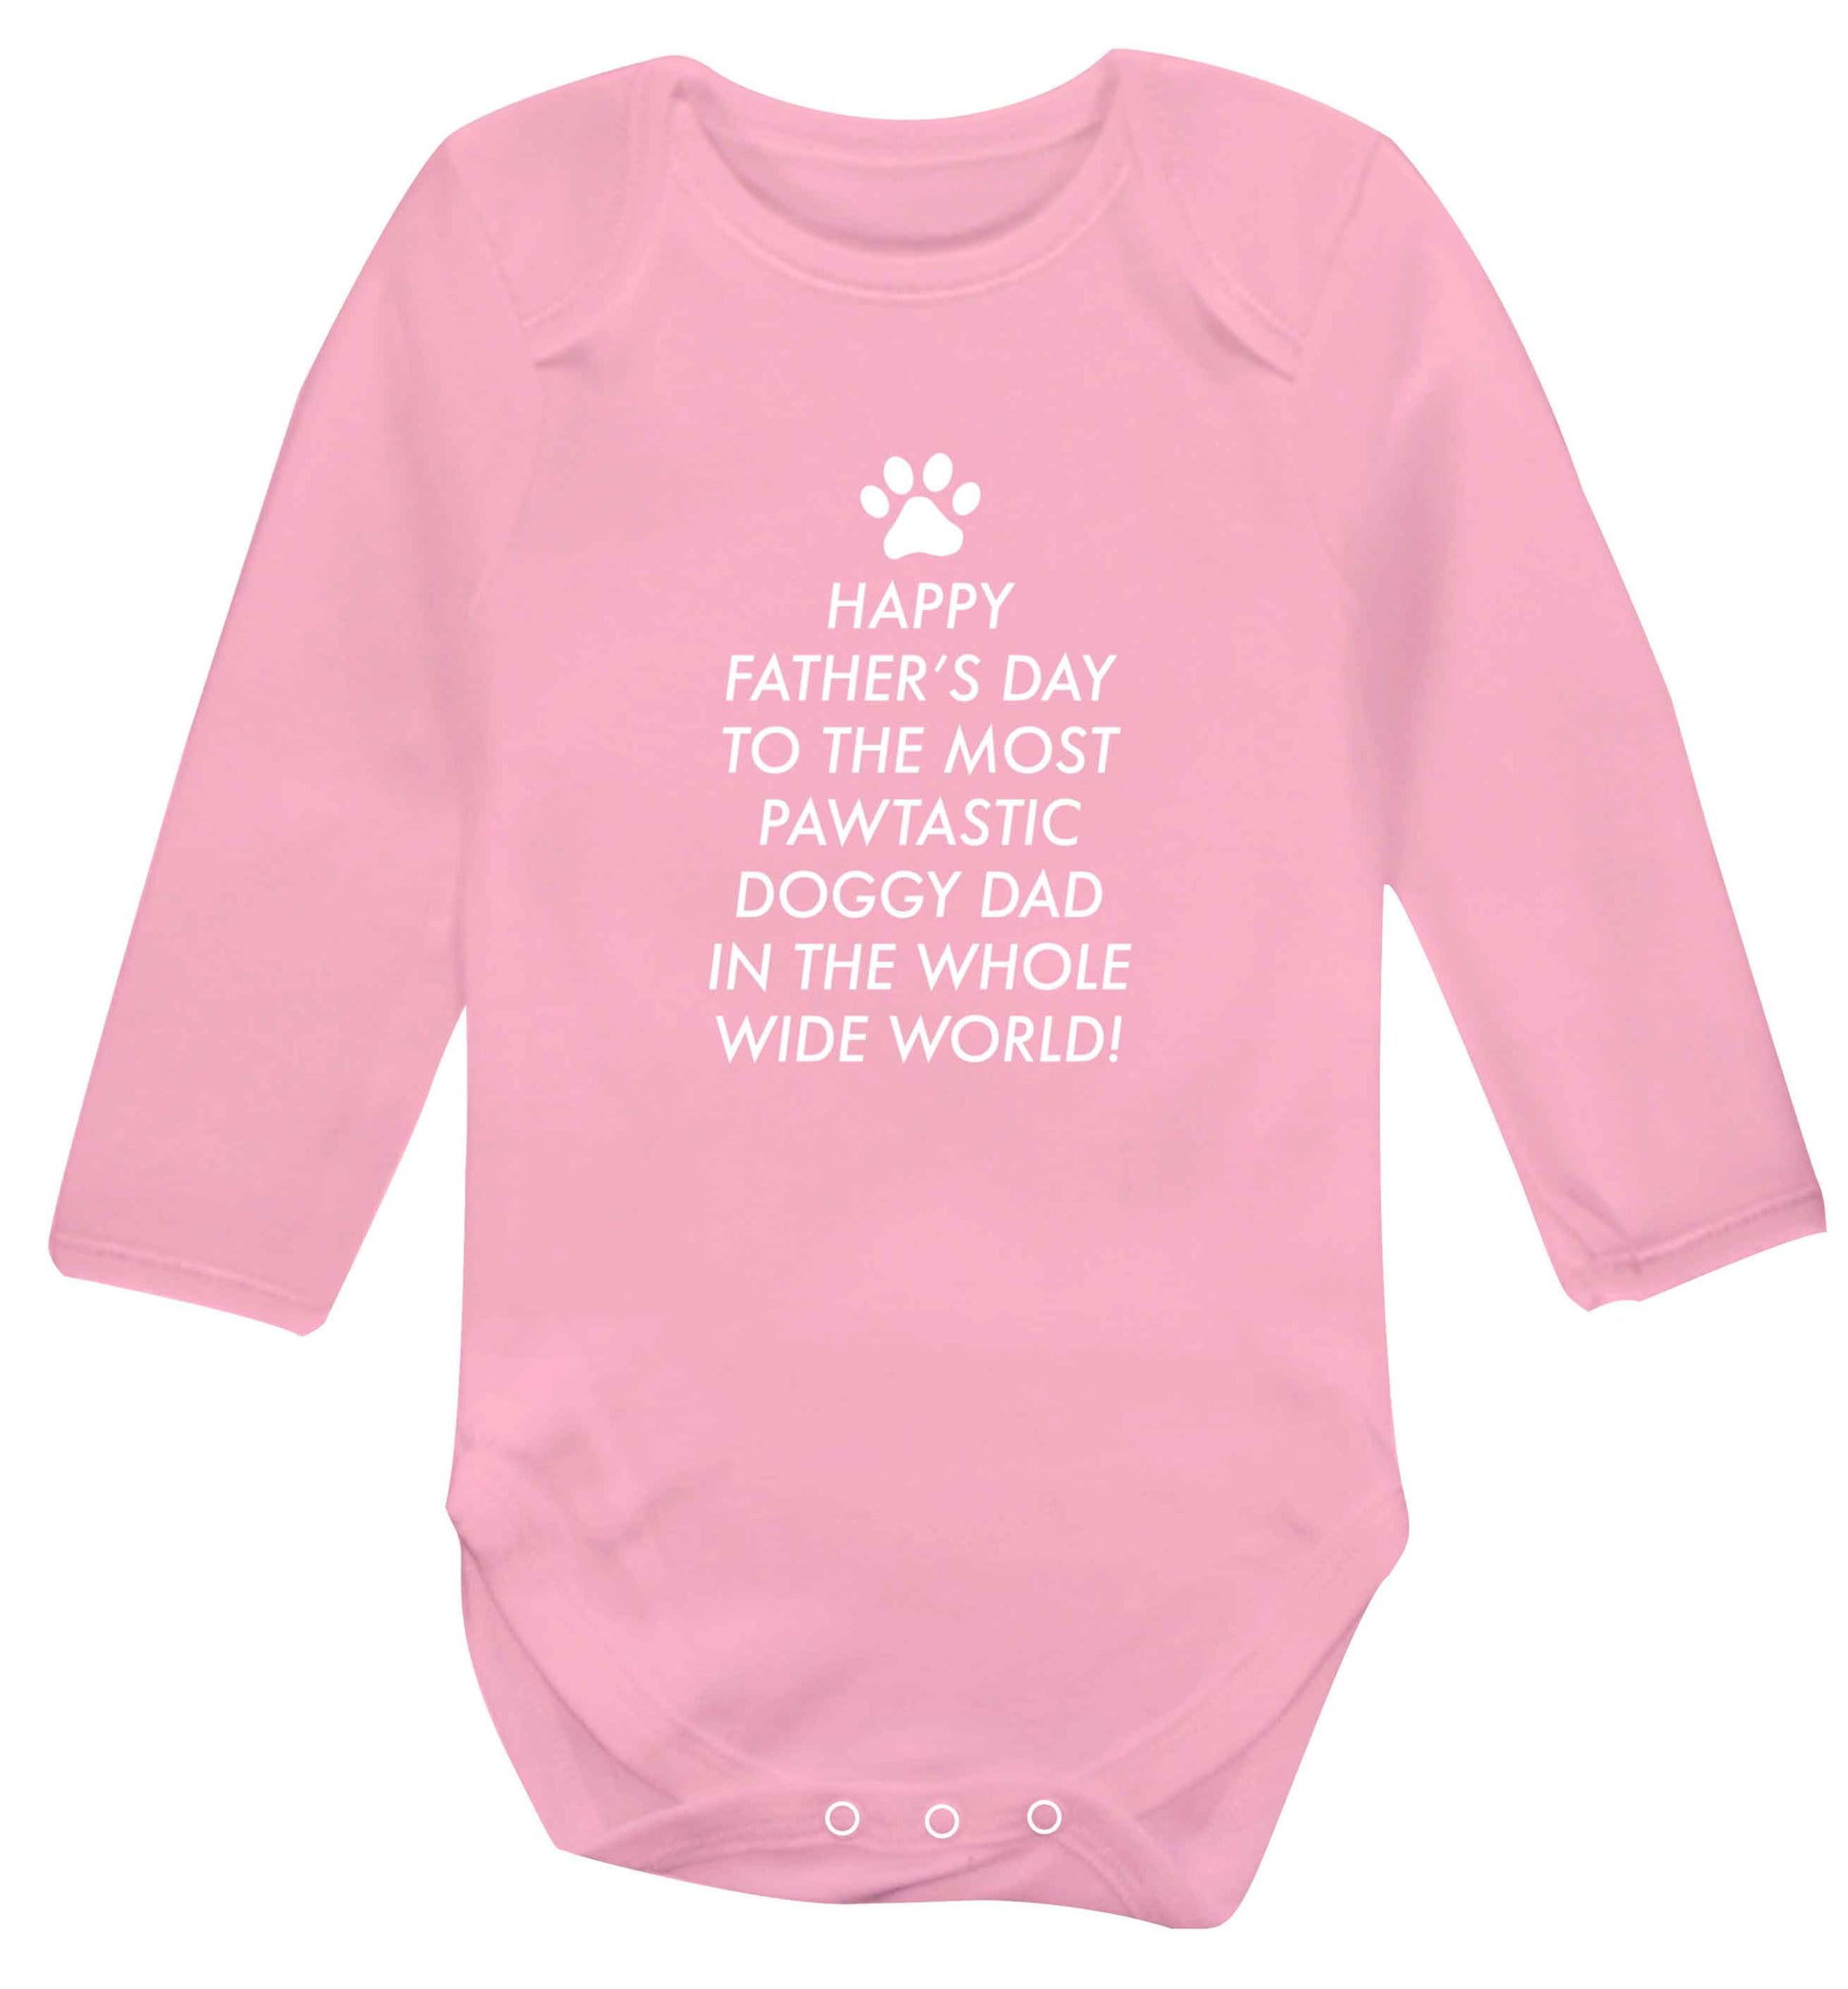 Happy Father's day to the most pawtastic doggy dad in the whole wide world!baby vest long sleeved pale pink 6-12 months